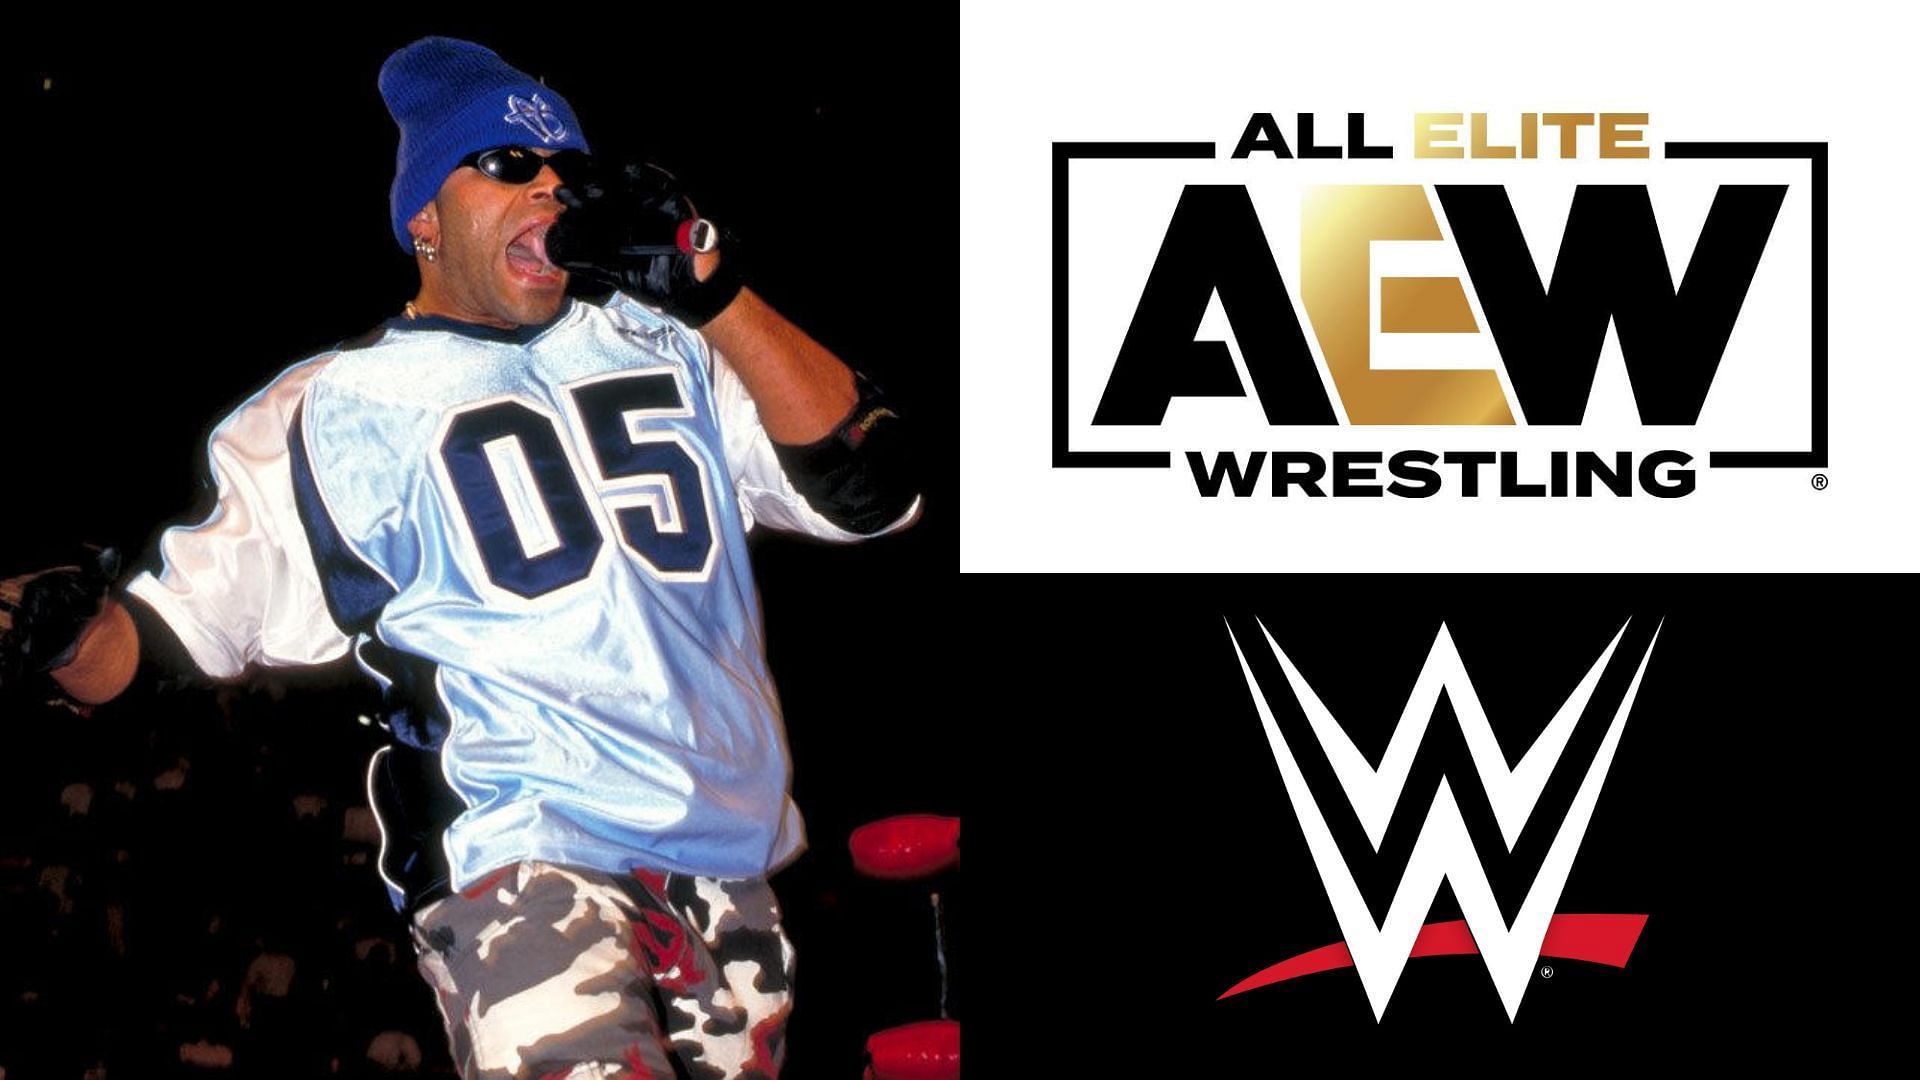 Konnan is a former WCW superstar [Photo courtesy of WWE Official Website]